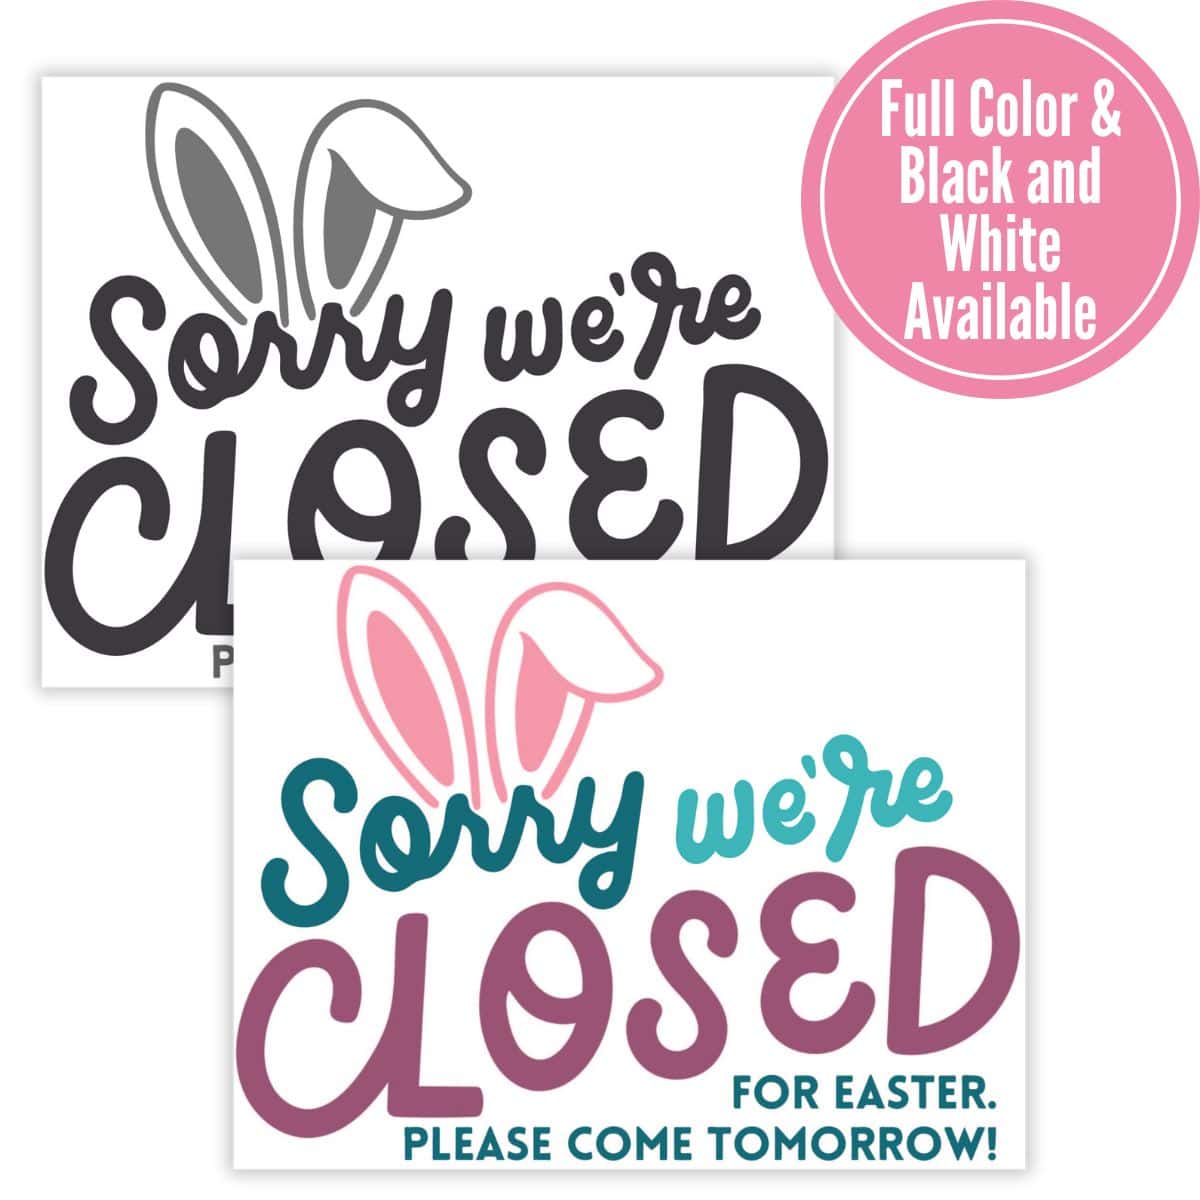 Black and White Printable: Sorry we are closed for Easter please come back tomorrow.